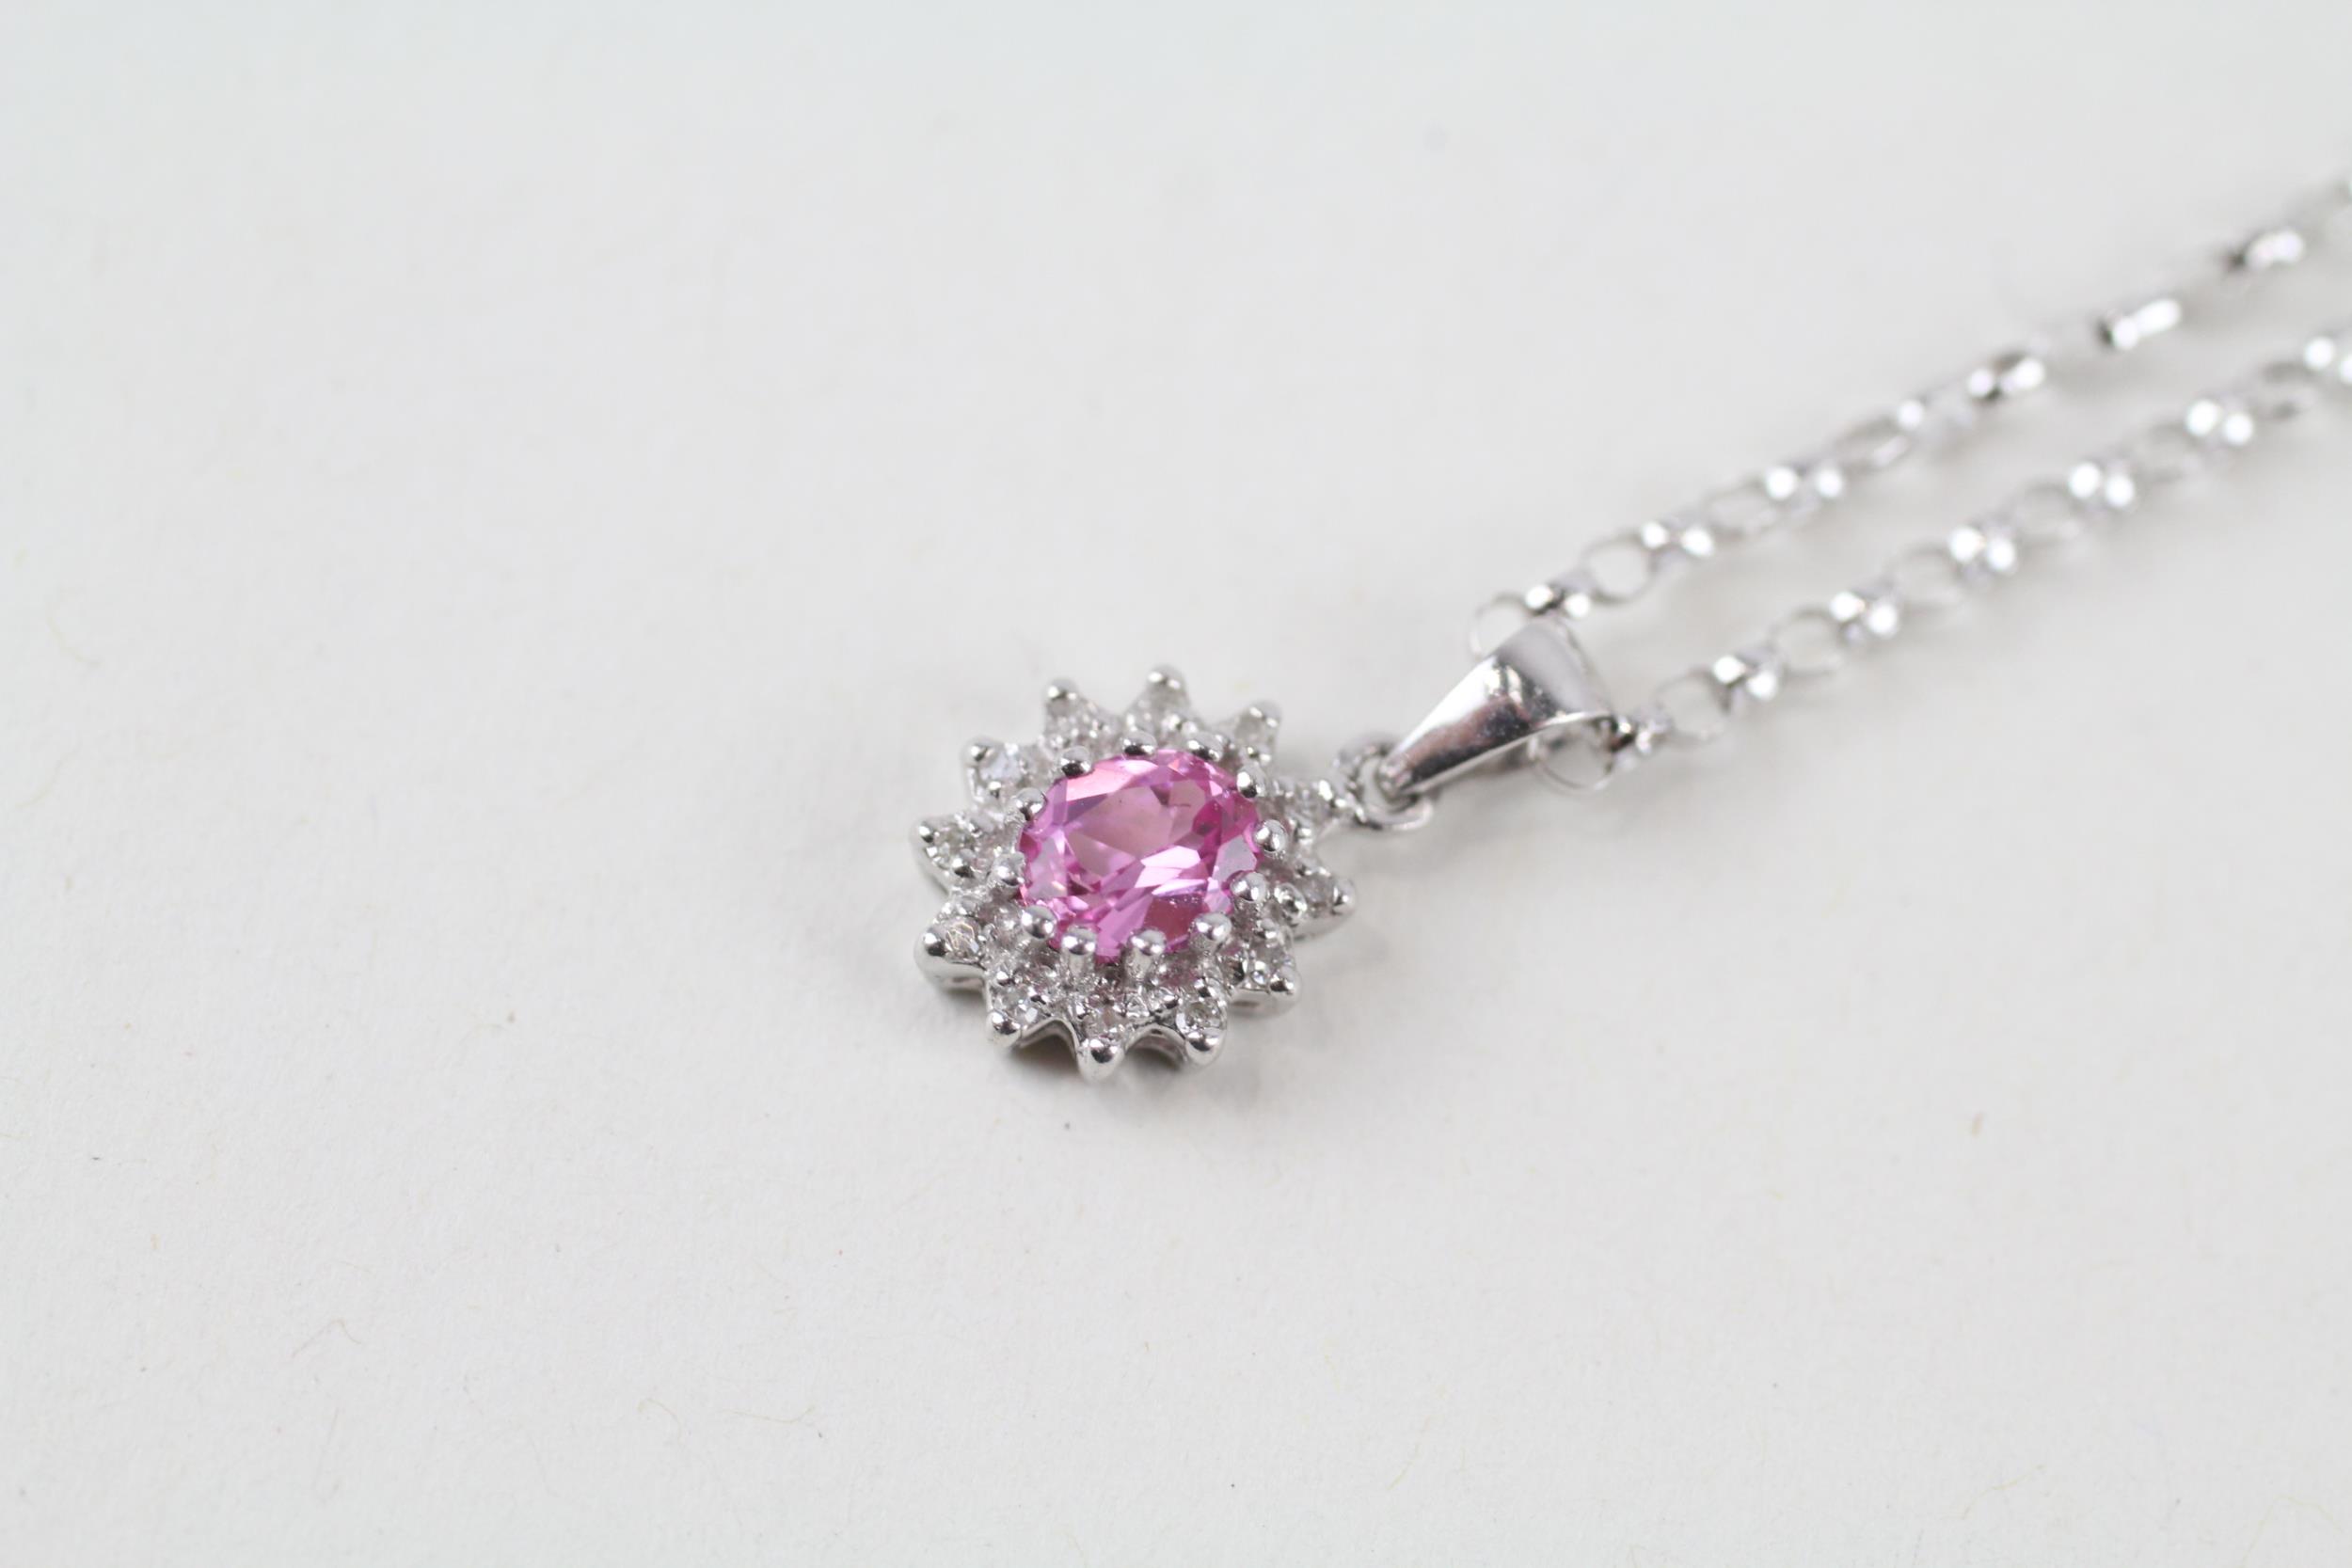 9ct white gold diamond & pink sapphire cluster pendant necklace (1.9g) - Image 2 of 4